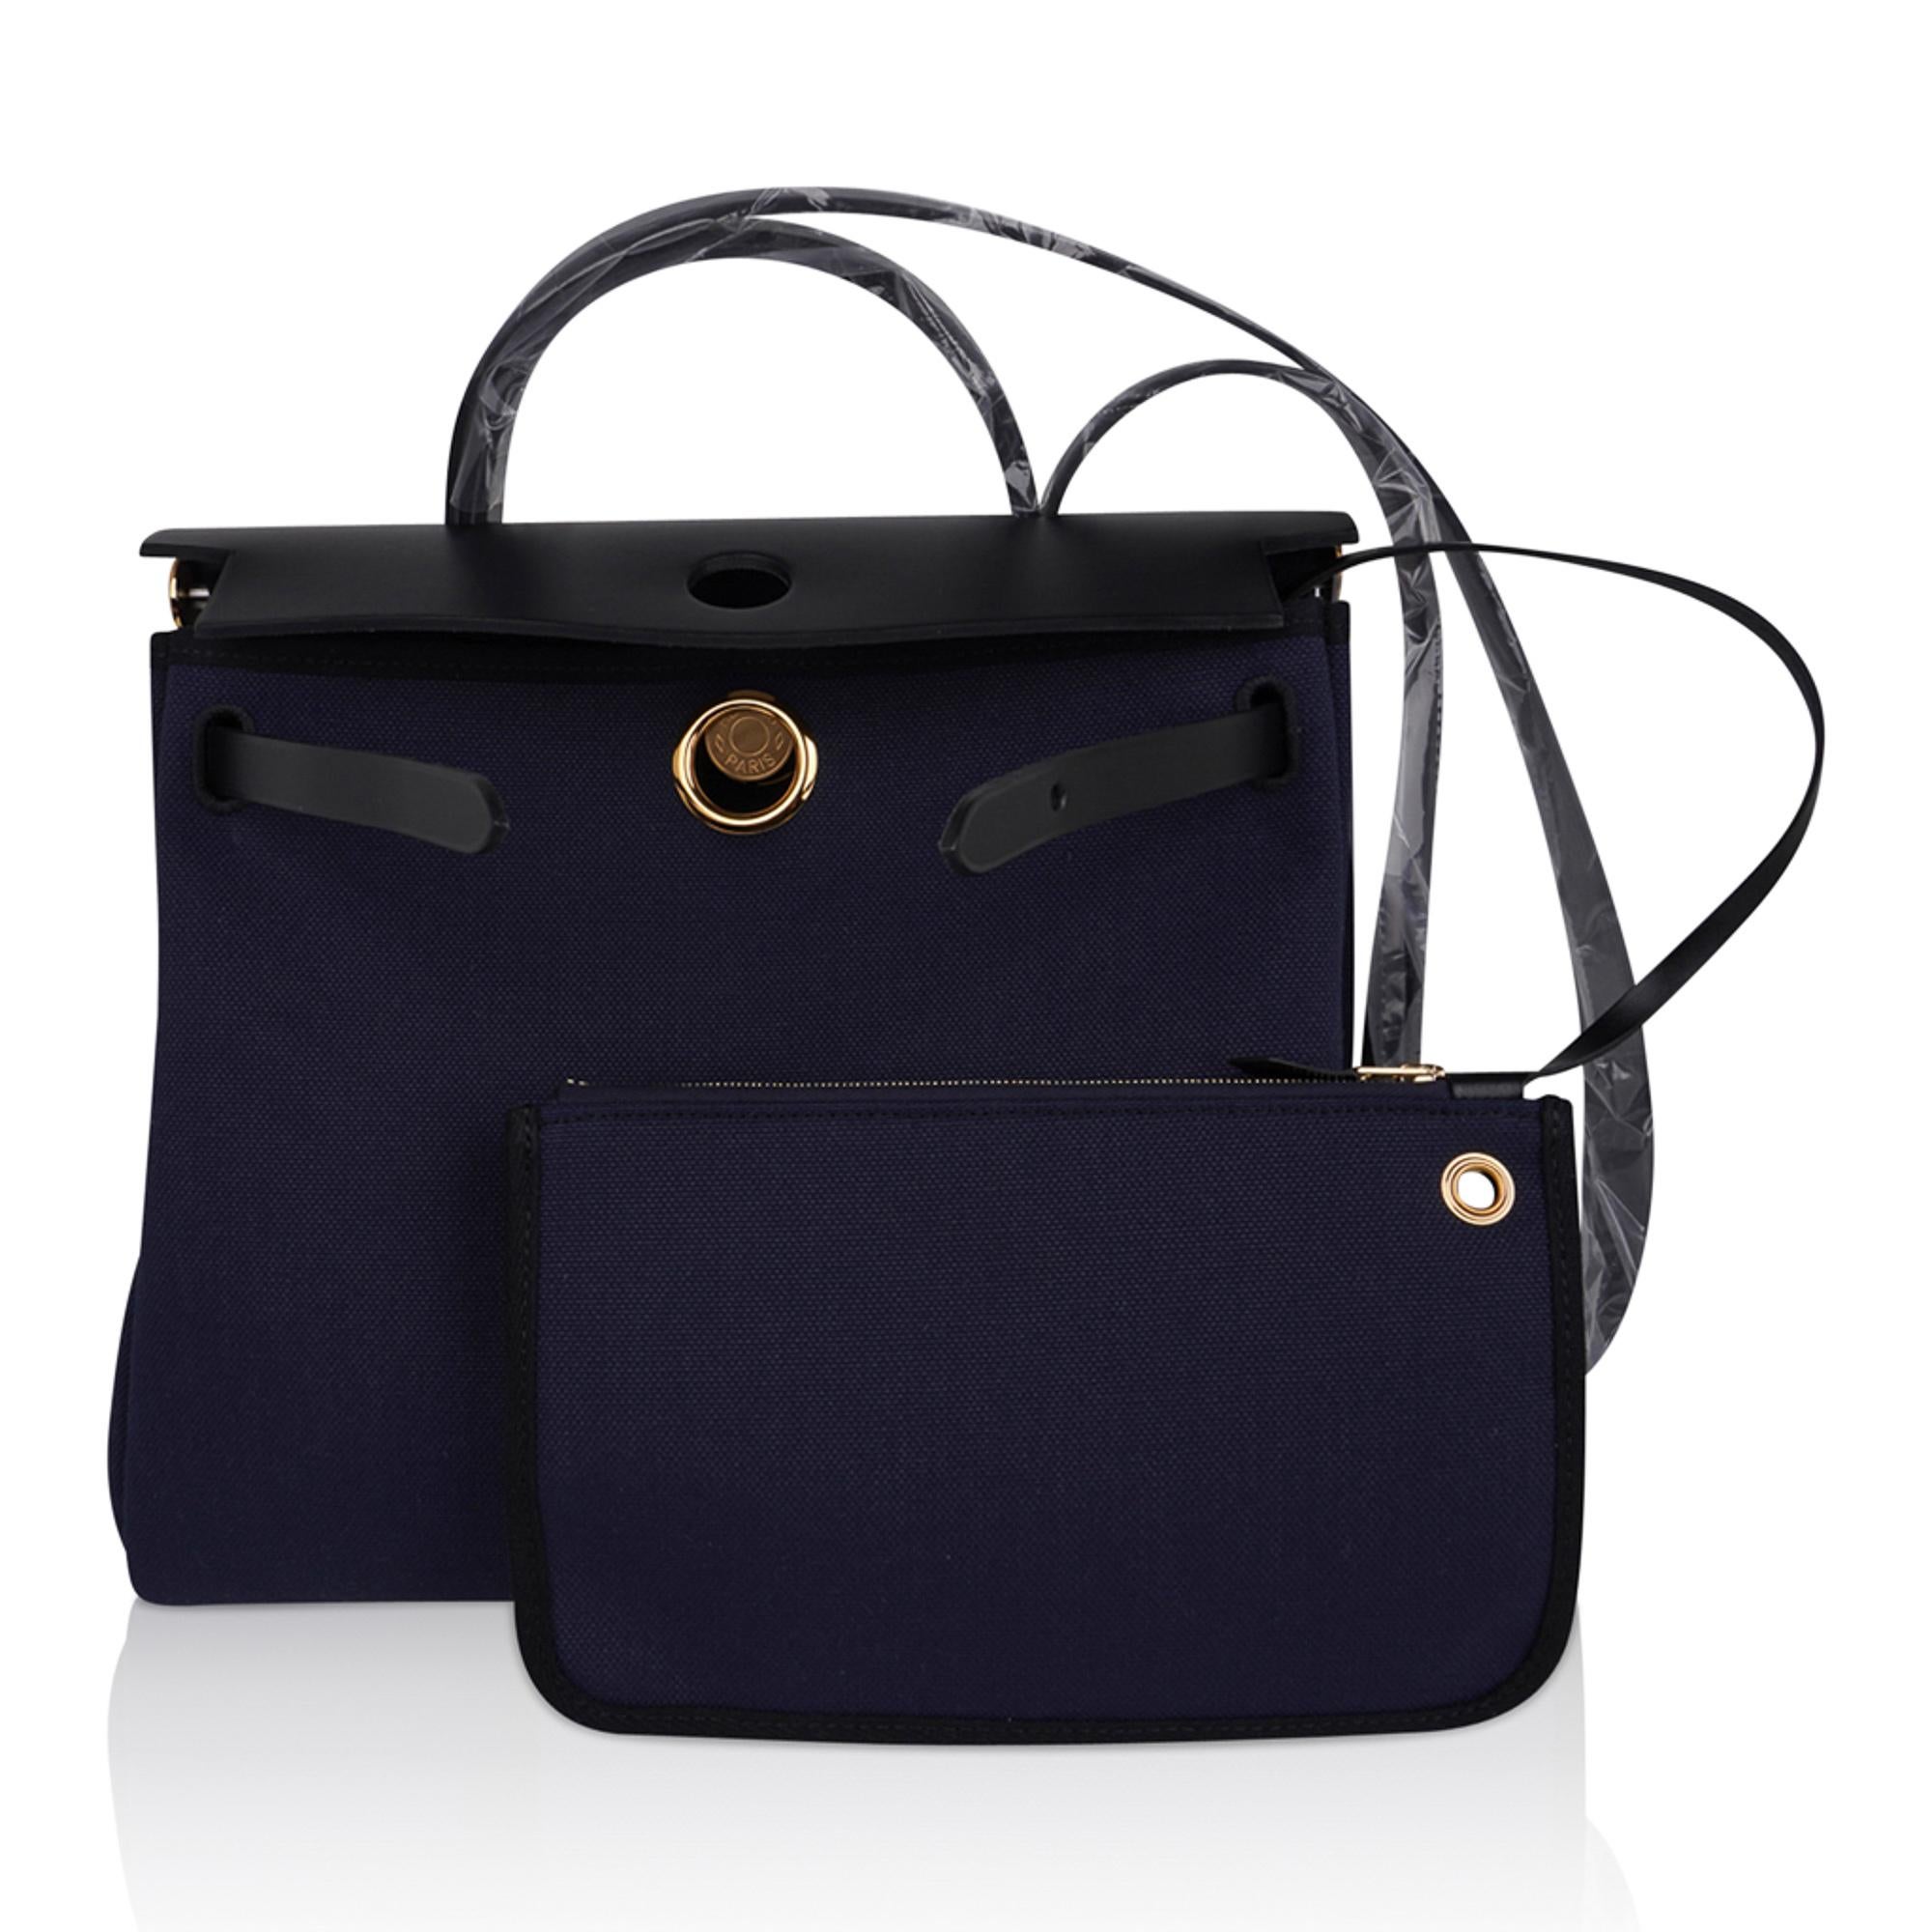 Mightychic offers an Hermes Herbag Zip 31 featured in Bleu Indigo Toile and Black Vache Hunter cowhide leather.
Rare with Gold signature Clou de Selle closure.
Chic colour combination and a fabulous versatile bag. 
Rear has an exterior canvas zip